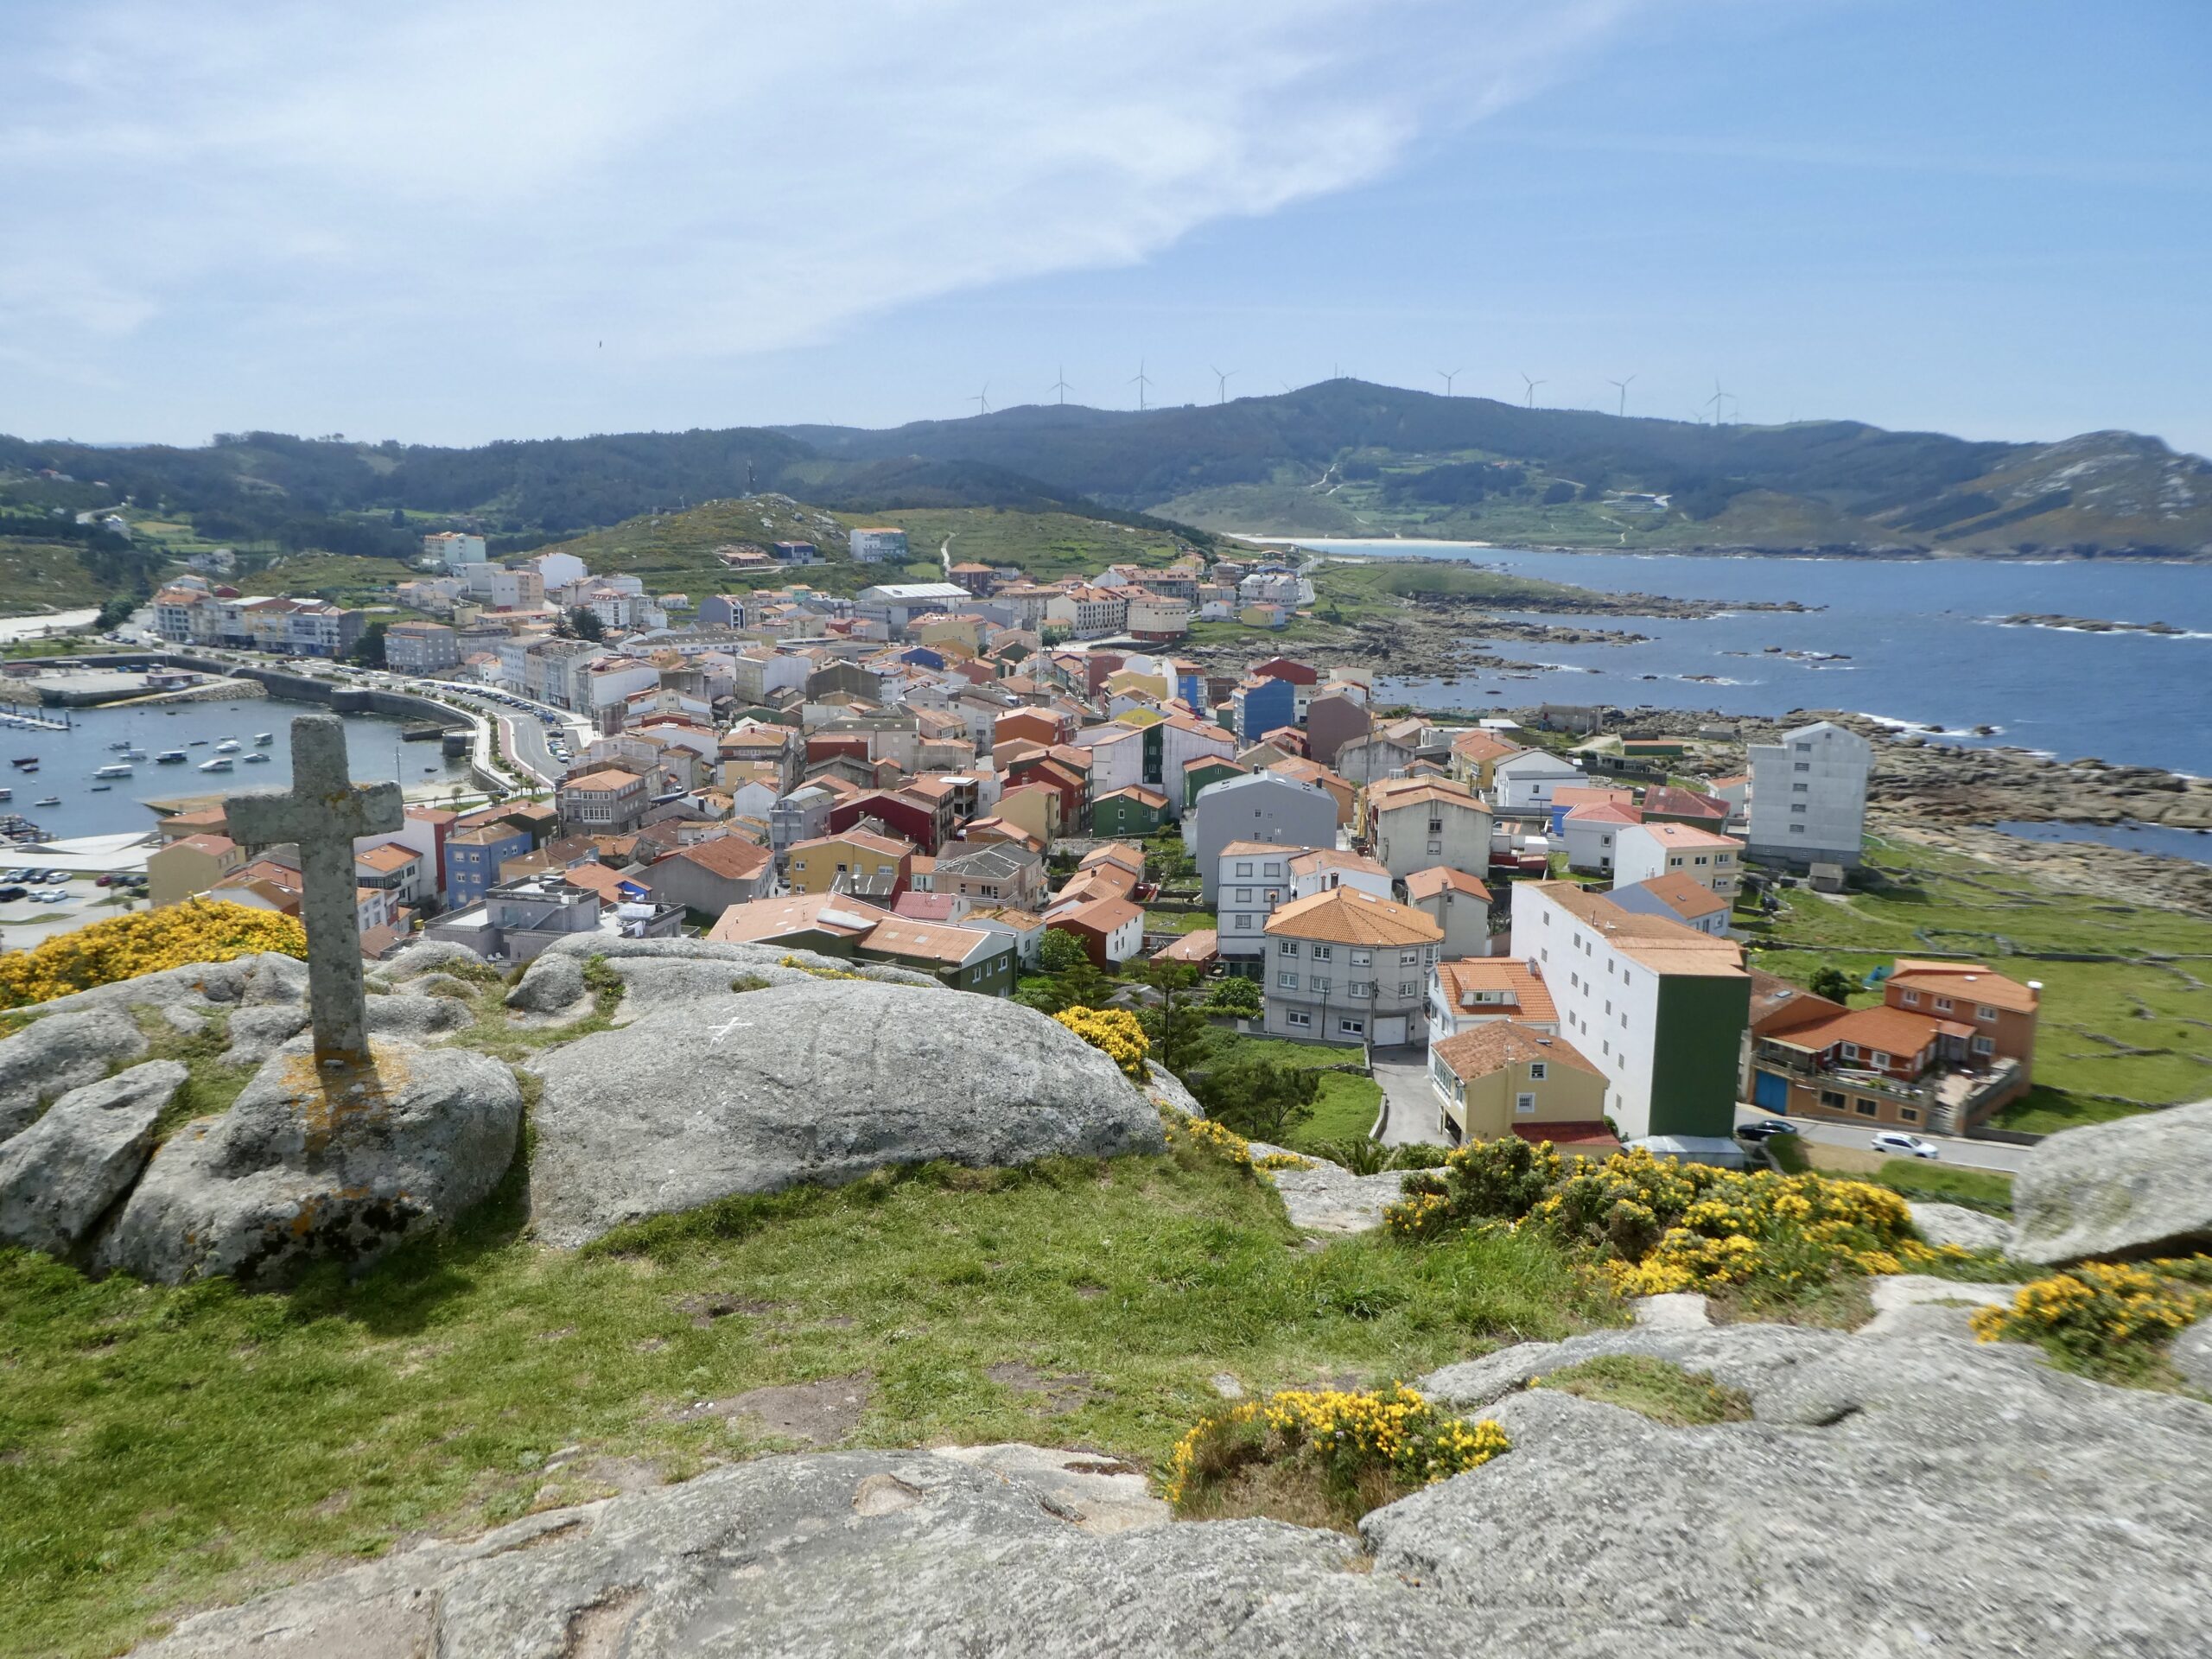 View from the hilltop overlooking Muxia in Galicia, Spain